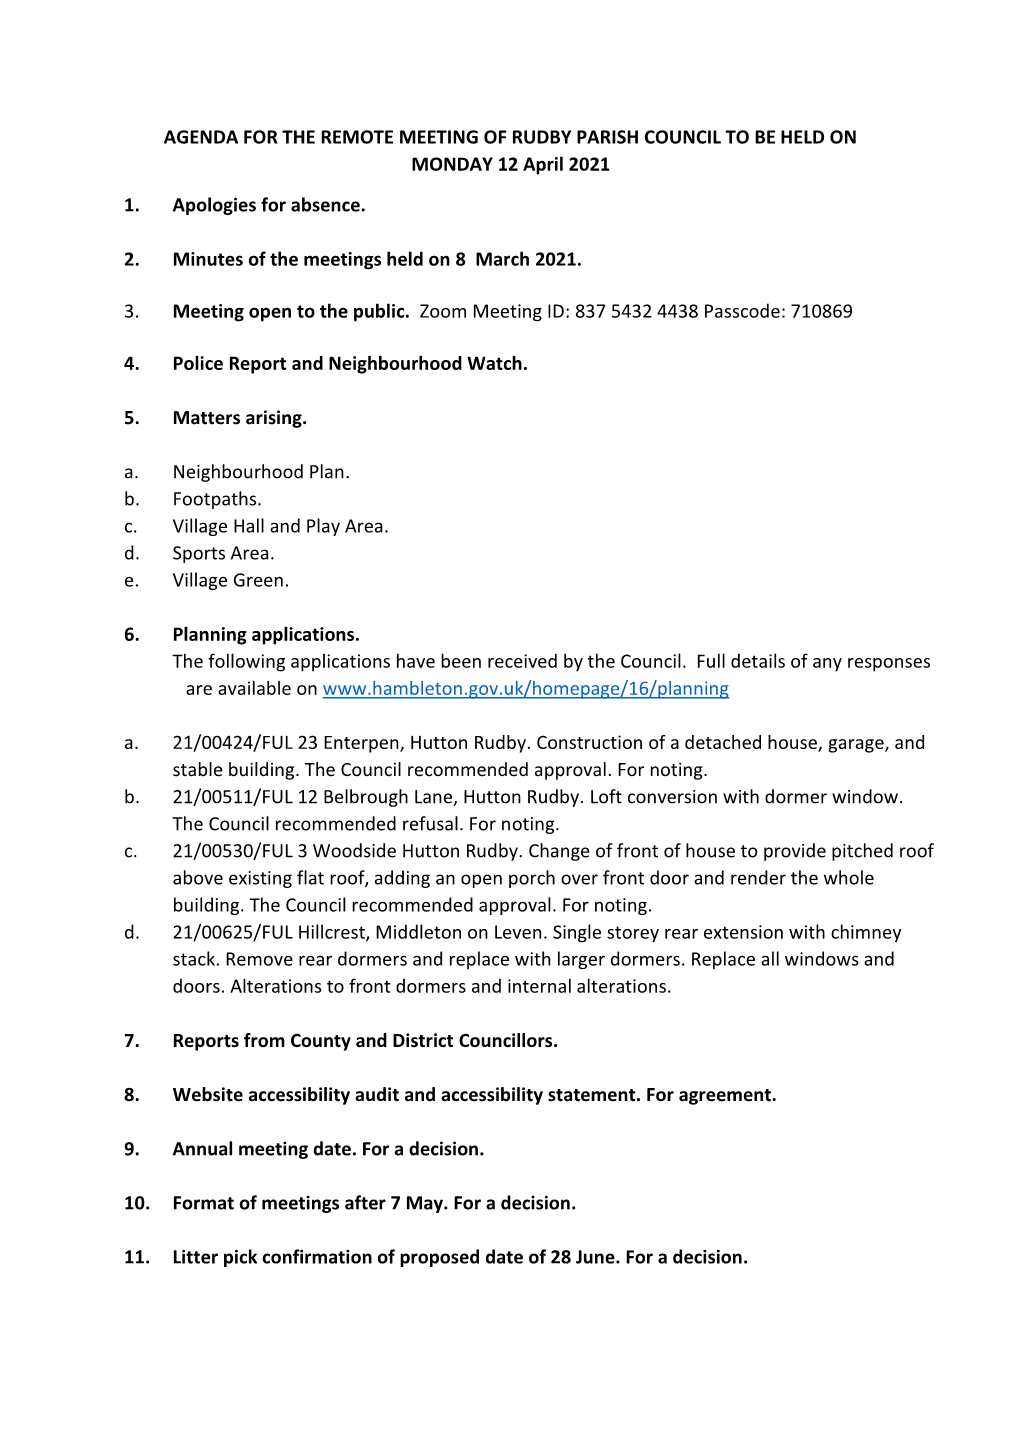 AGENDA for the REMOTE MEETING of RUDBY PARISH COUNCIL to BE HELD on MONDAY 12 April 2021 1